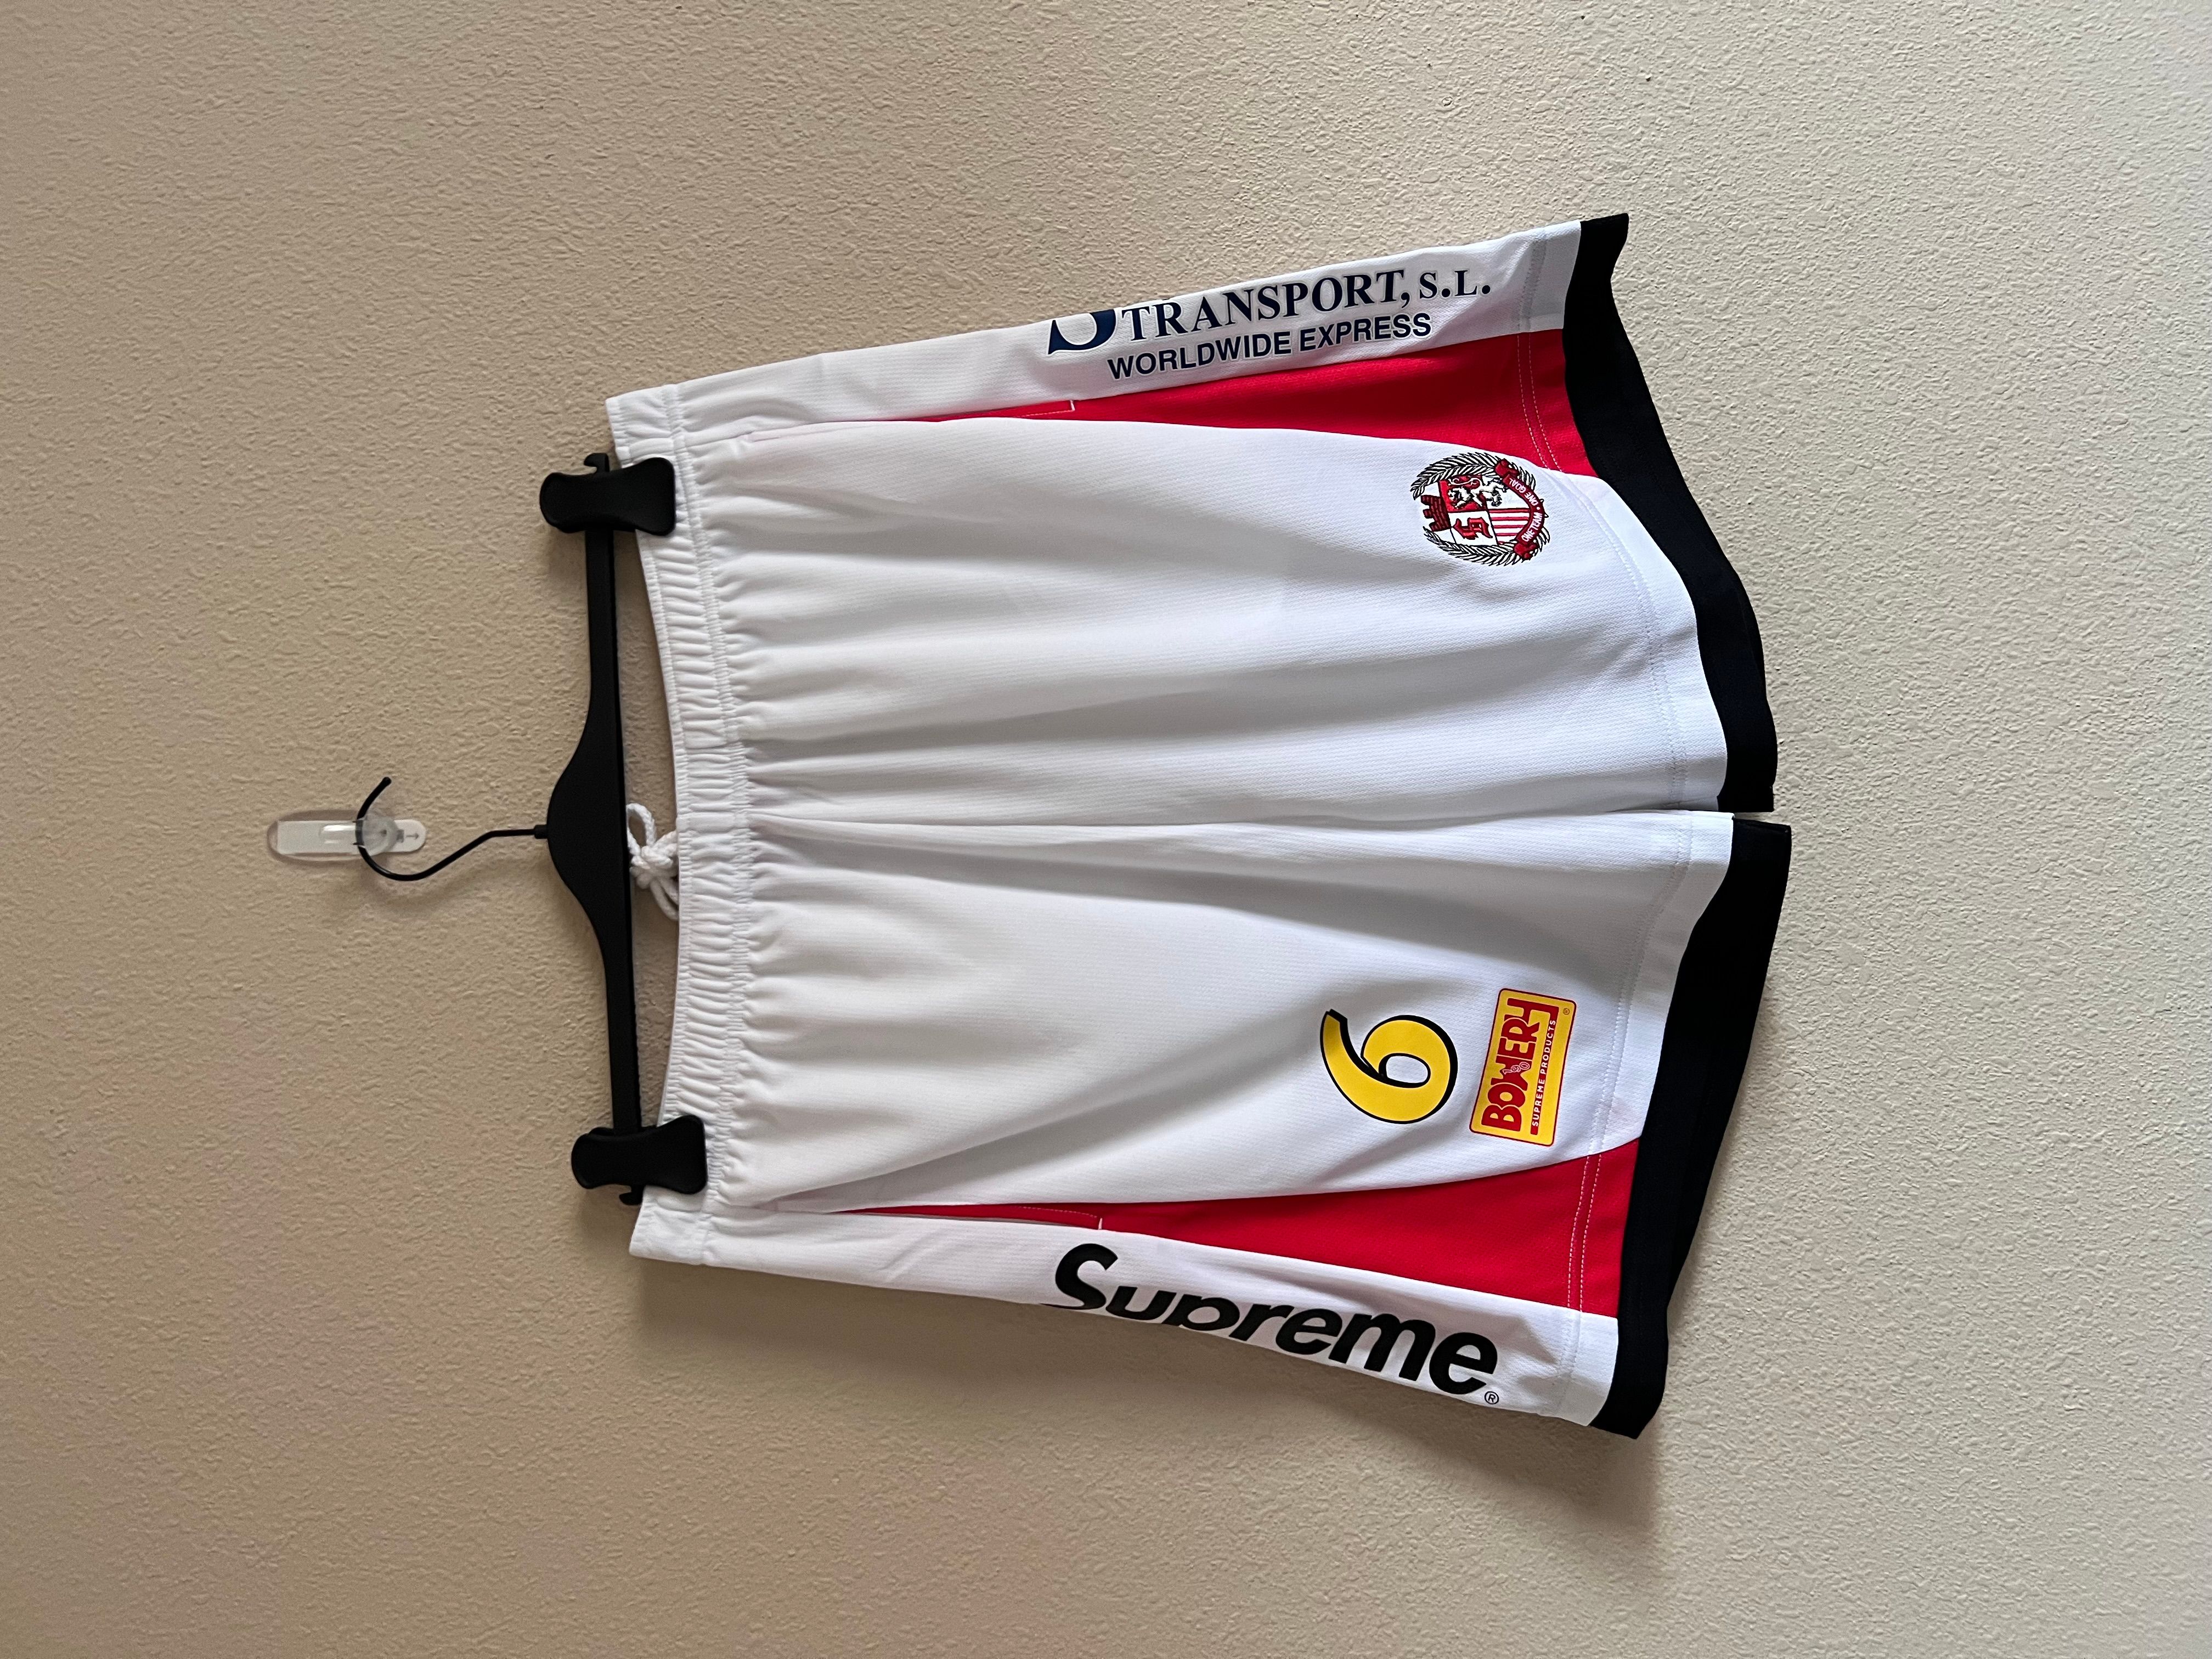 Pre-owned Supreme Soccer Shorts In White